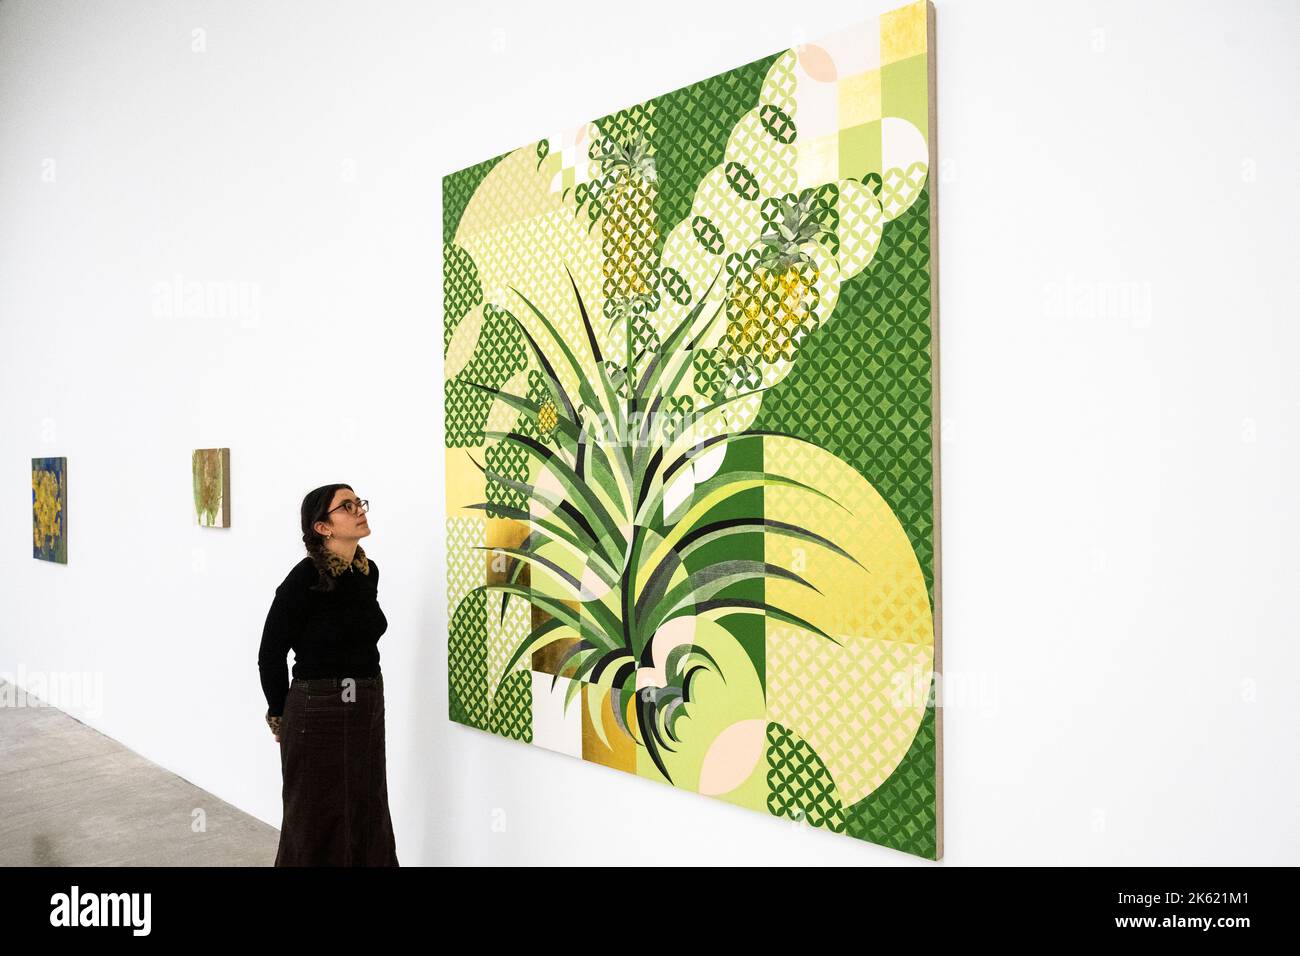 London, UK.  11 October 2022. A staff member with 'Pineapple', 2022, by Gabriel Orozco at the preview of ‘Diario de Plantas’, a new exhibition by artist Gabriel Orozco at White Cube, Mason’s Yard, in Mayfair.  The leaf print-inspired works began as entries in small notebooks during a period of time spent in Tokyo and Mexico City.  The exhibition runs 12 October to 12 November 2022. Credit: Stephen Chung / Alamy Live News Stock Photo